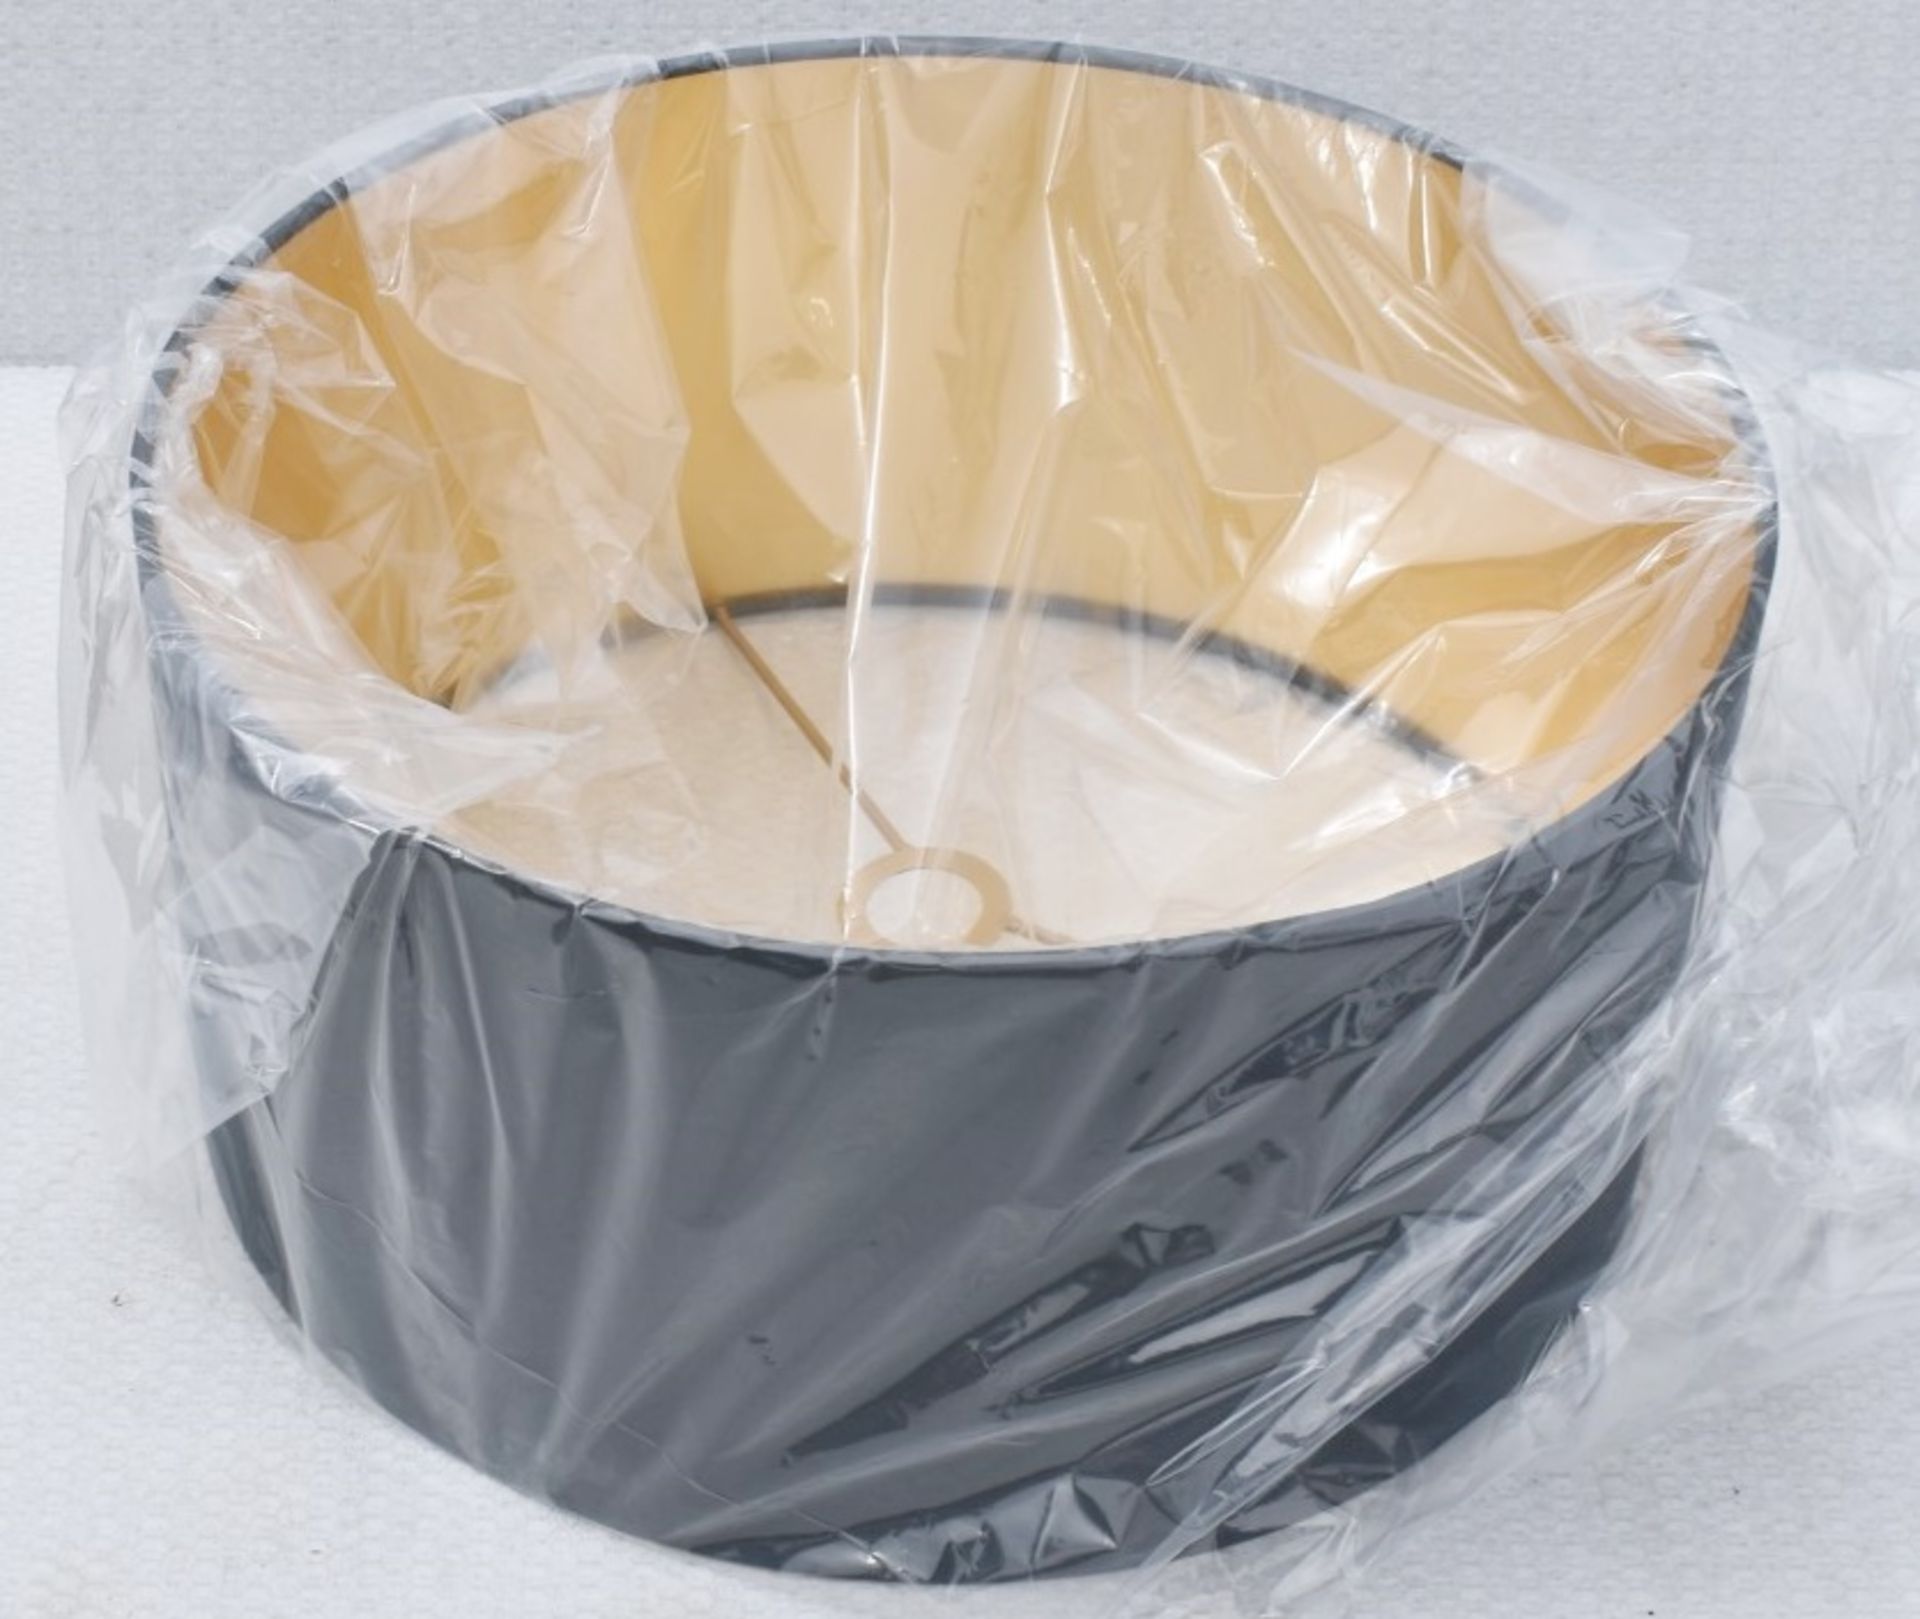 1 x PORADA 'Gary' Designer Floor Lamp Cotton Drum Shade In Charcoal and Gold - Unused Boxed - Image 2 of 5